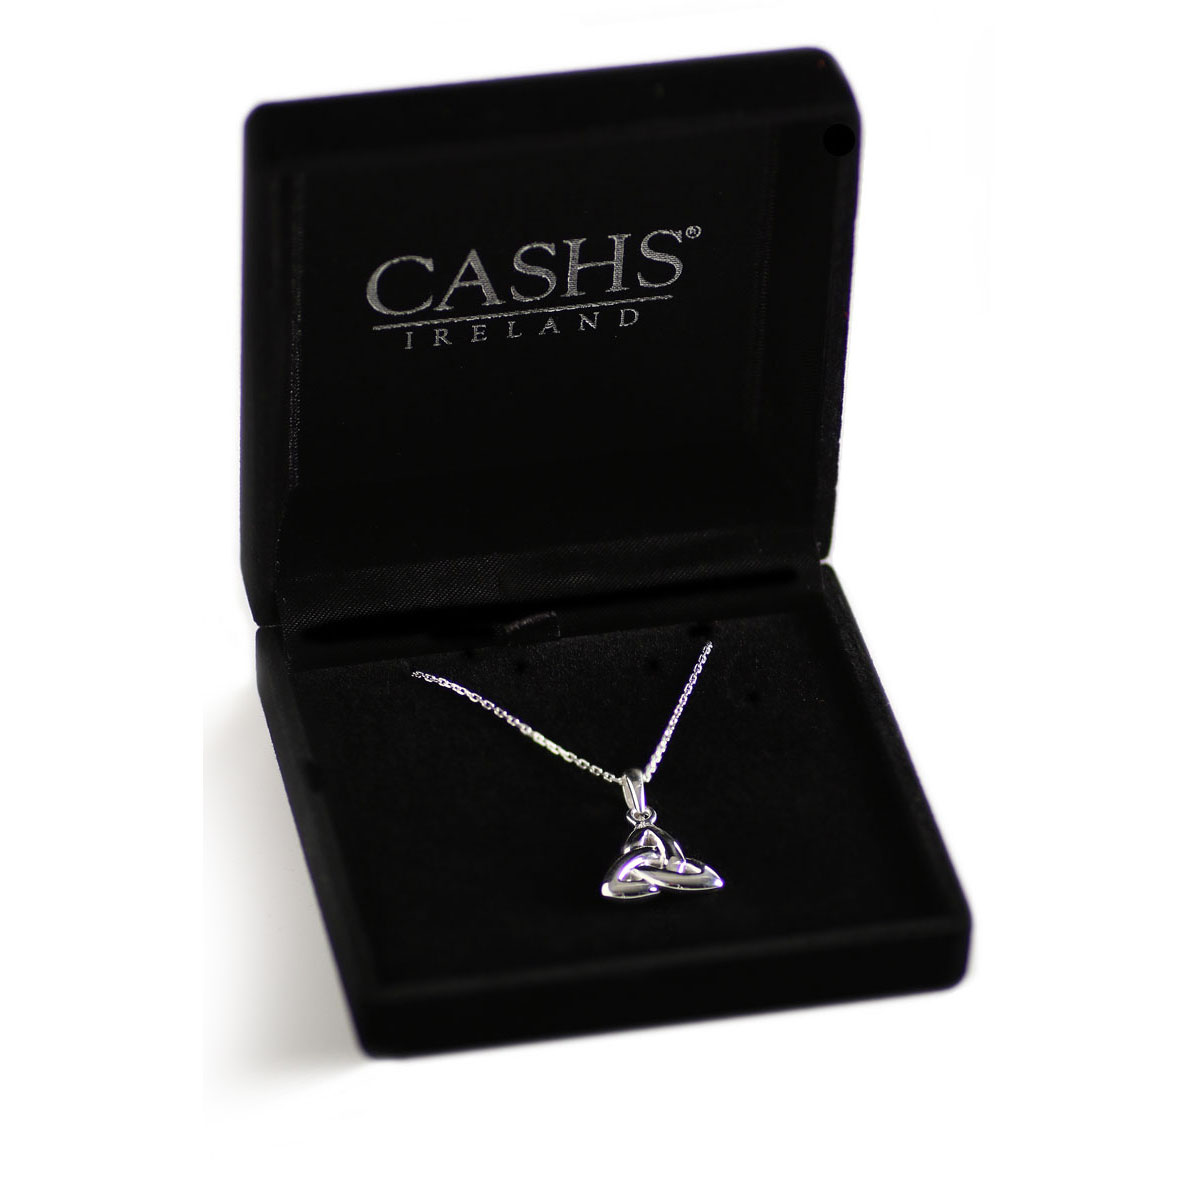 Cashs Ireland Sterling Silver Trinity Knot Pendant Necklace